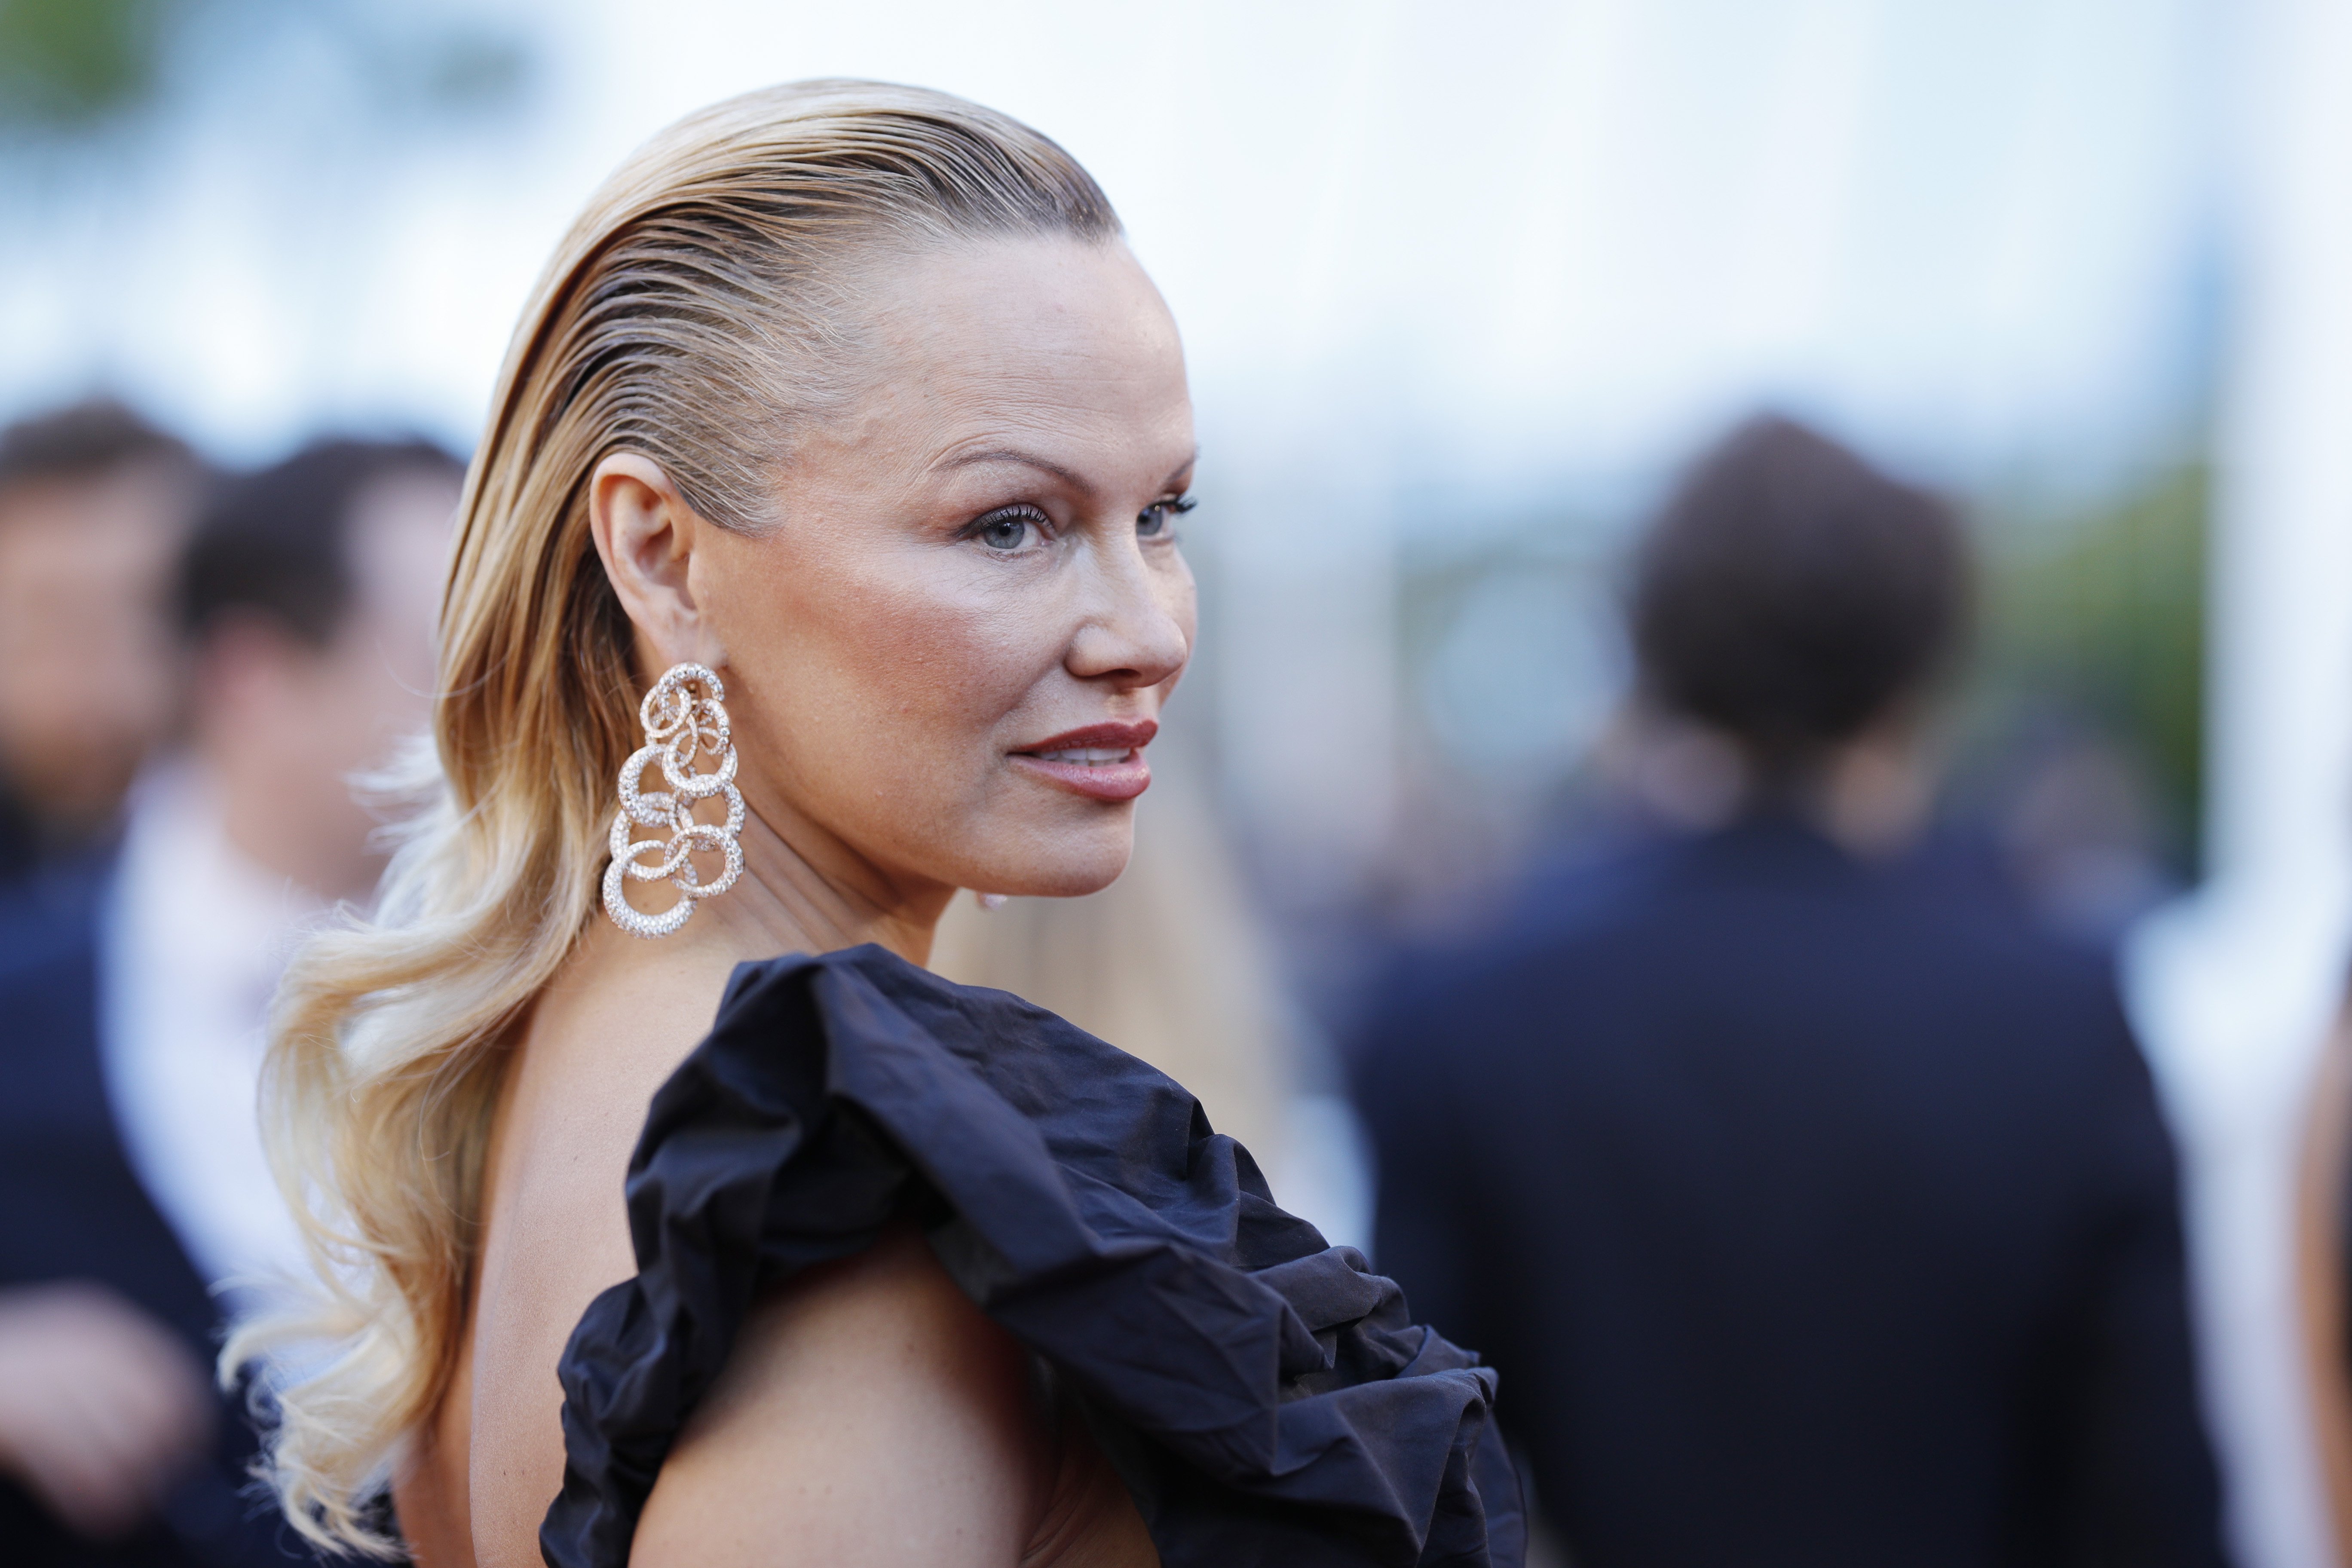 Pamela Anderson at the "120 Beats Per Minute (120 Battements Par Minute)" screening during the 70th annual Cannes Film Festival at Palais des Festivals in Cannes, France | Photo: Andreas Rentz/Getty Images